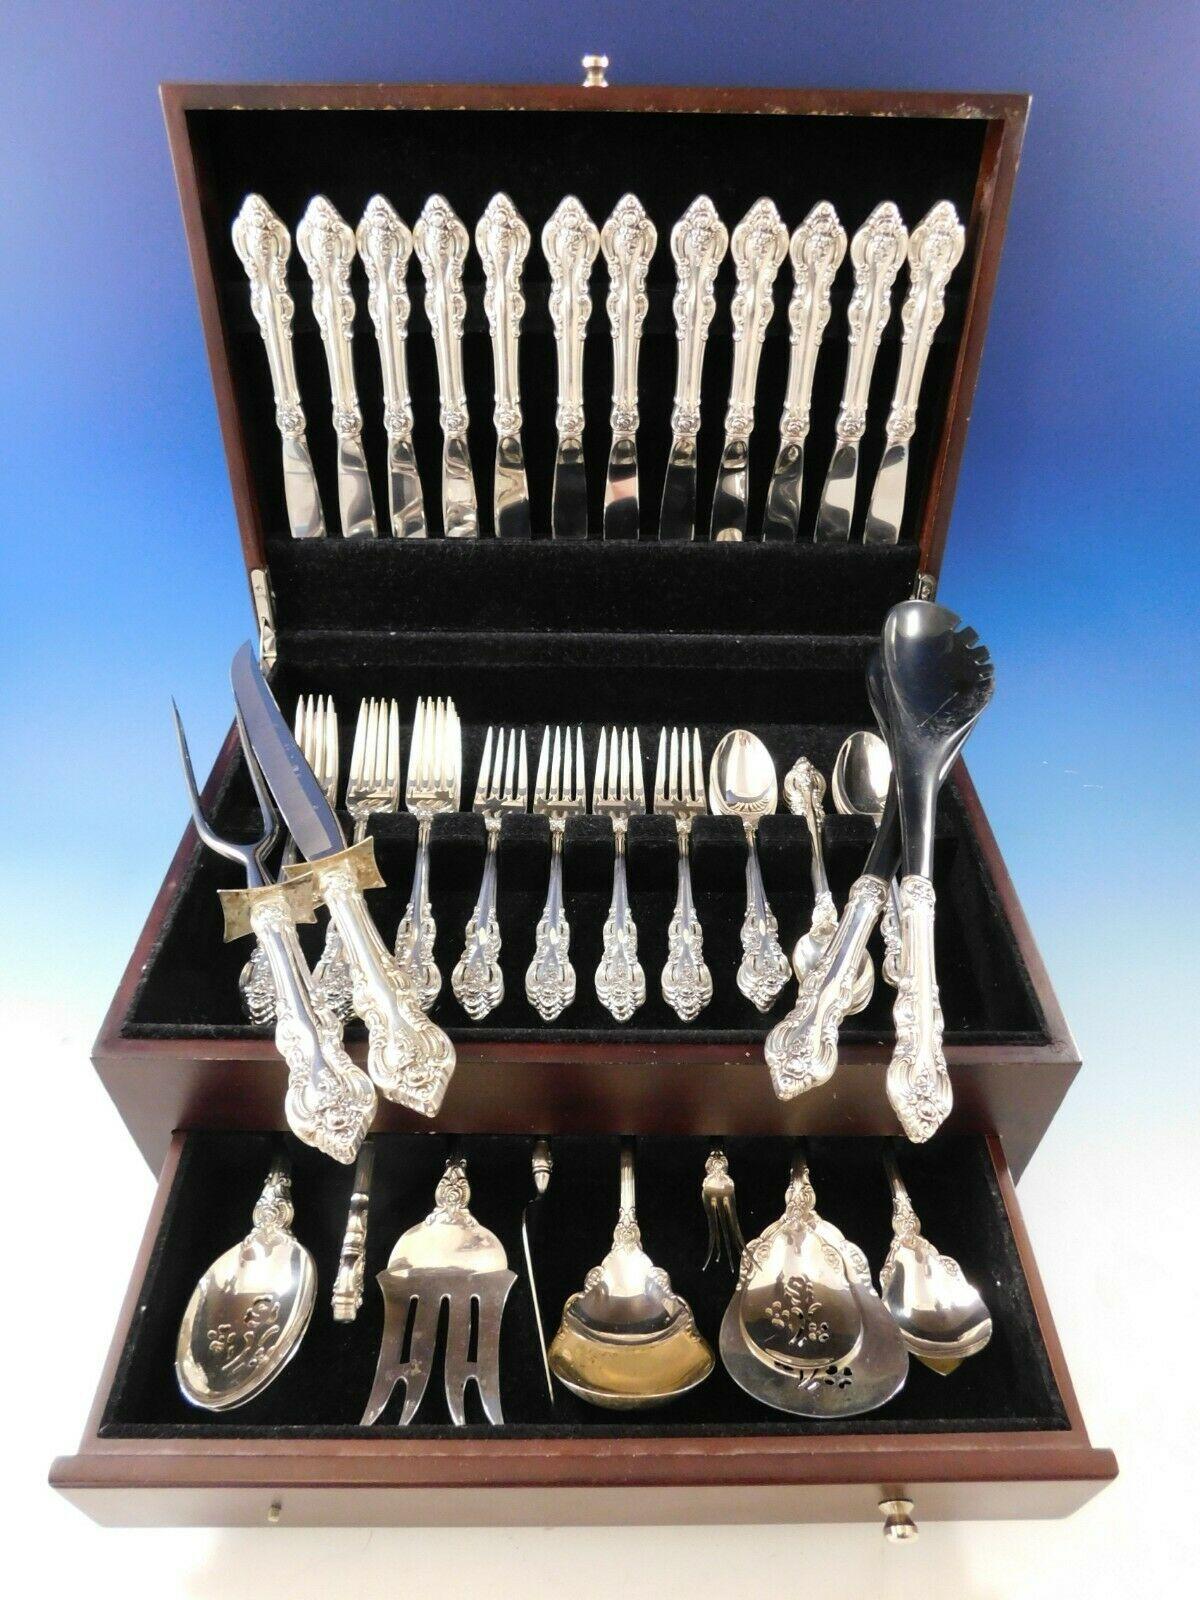 El Grandee by Towle sterling silver flatware set with many serving pieces, 61 pieces total. This set includes:

12 knives, 8 7/8